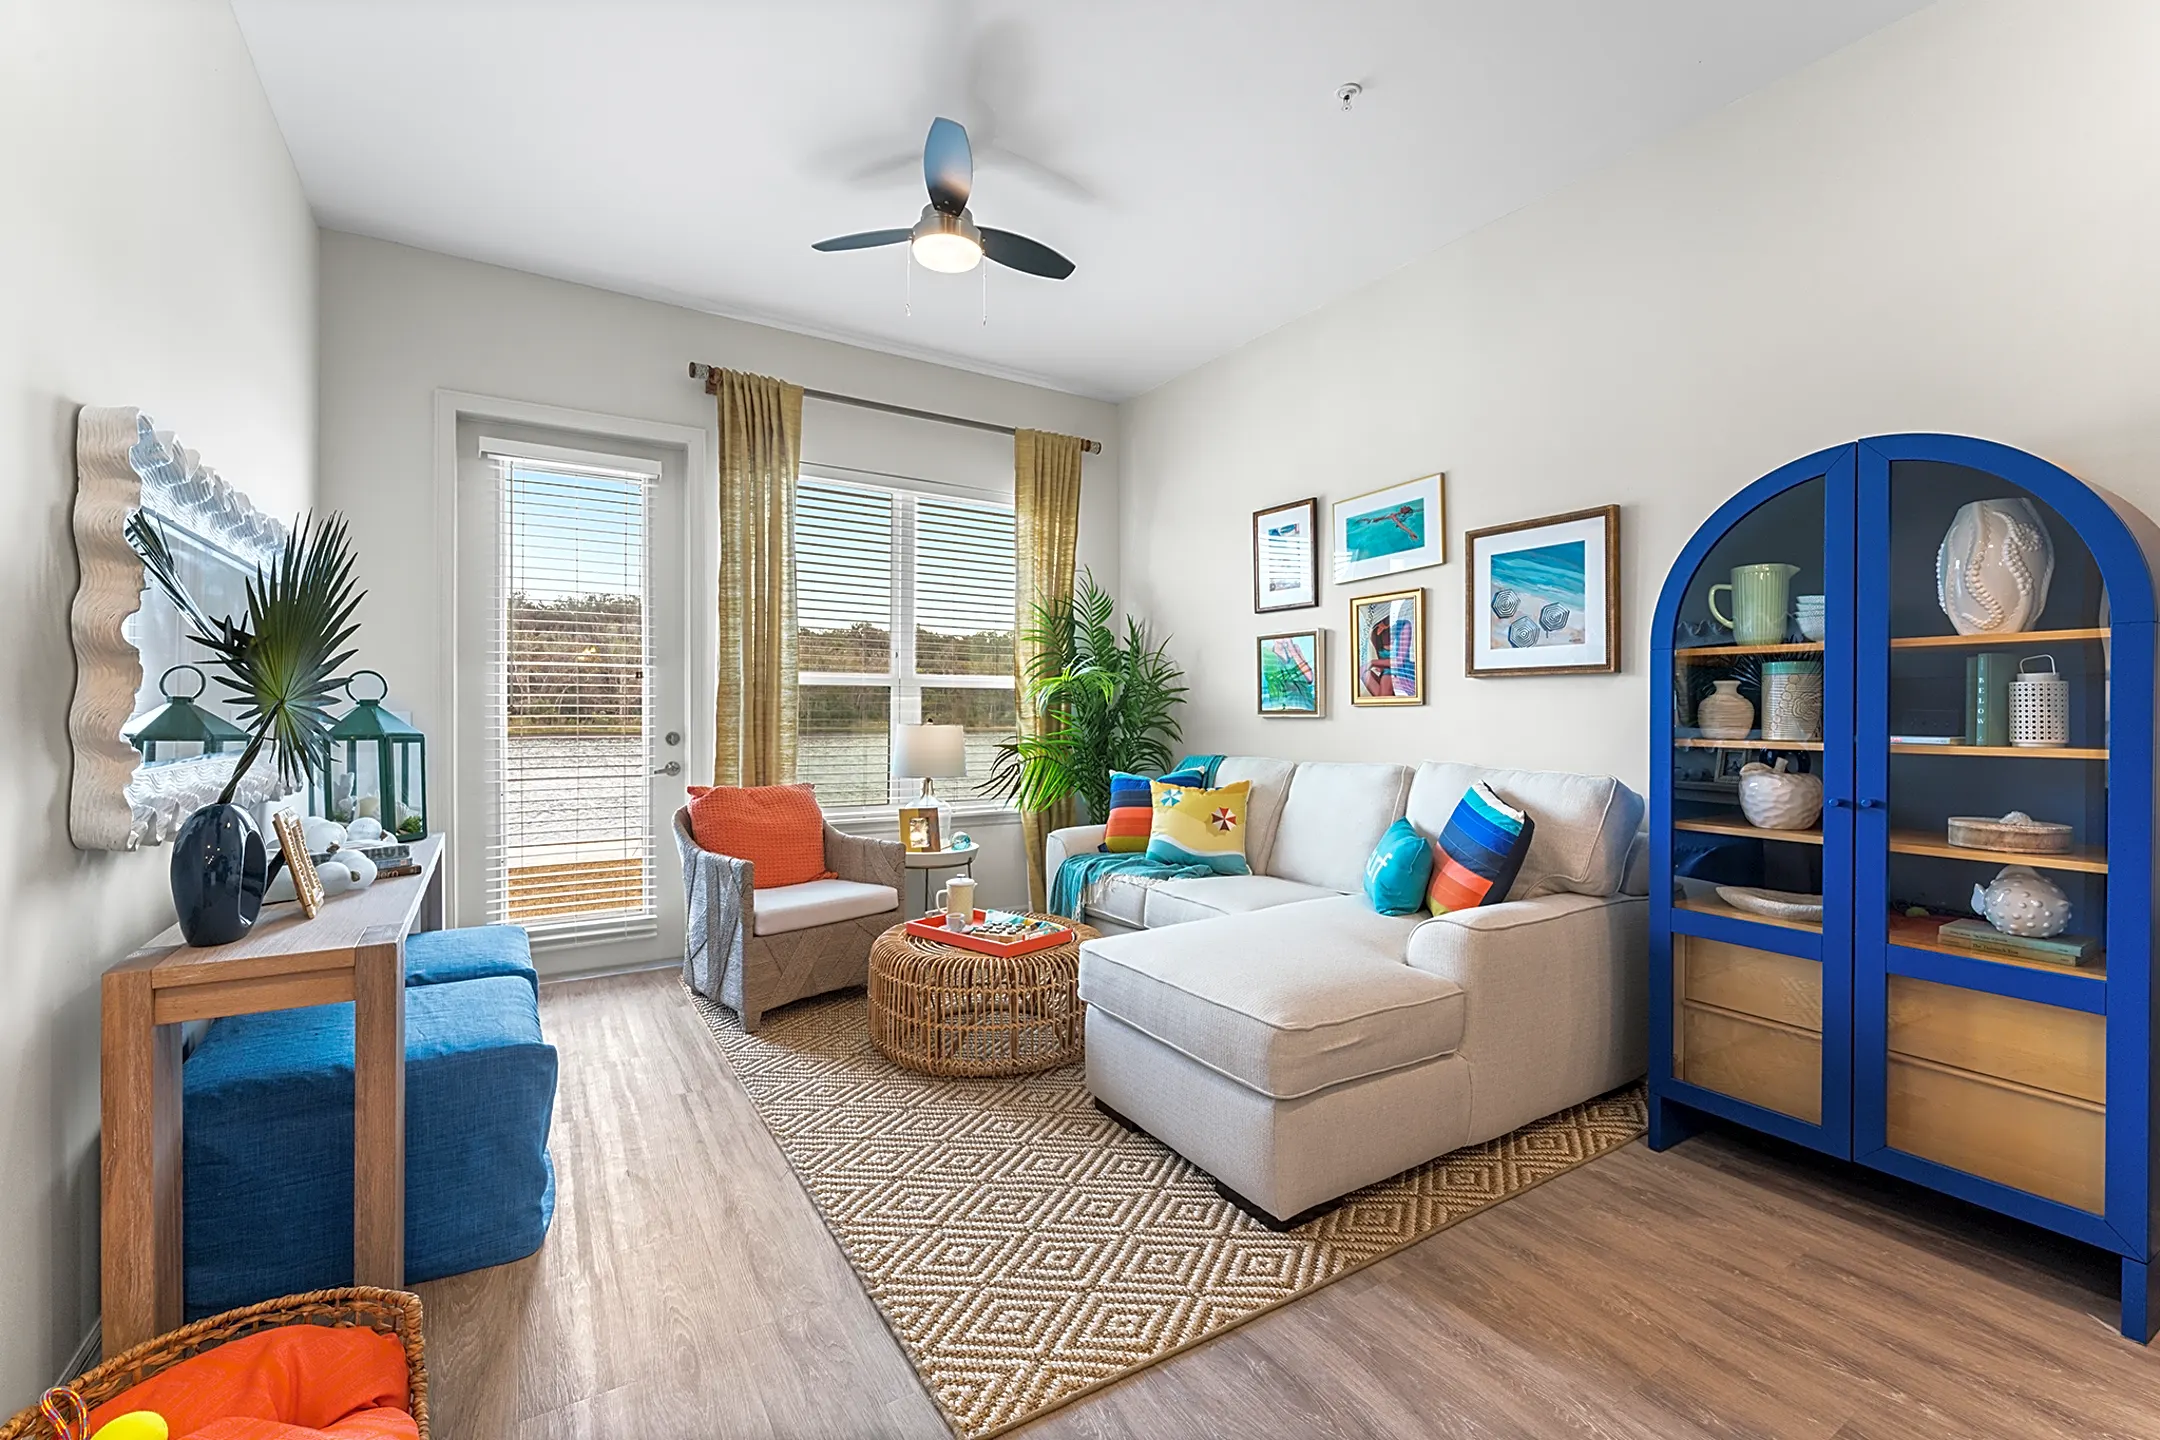 Living Room - The Reef Apartments - Jacksonville, FL